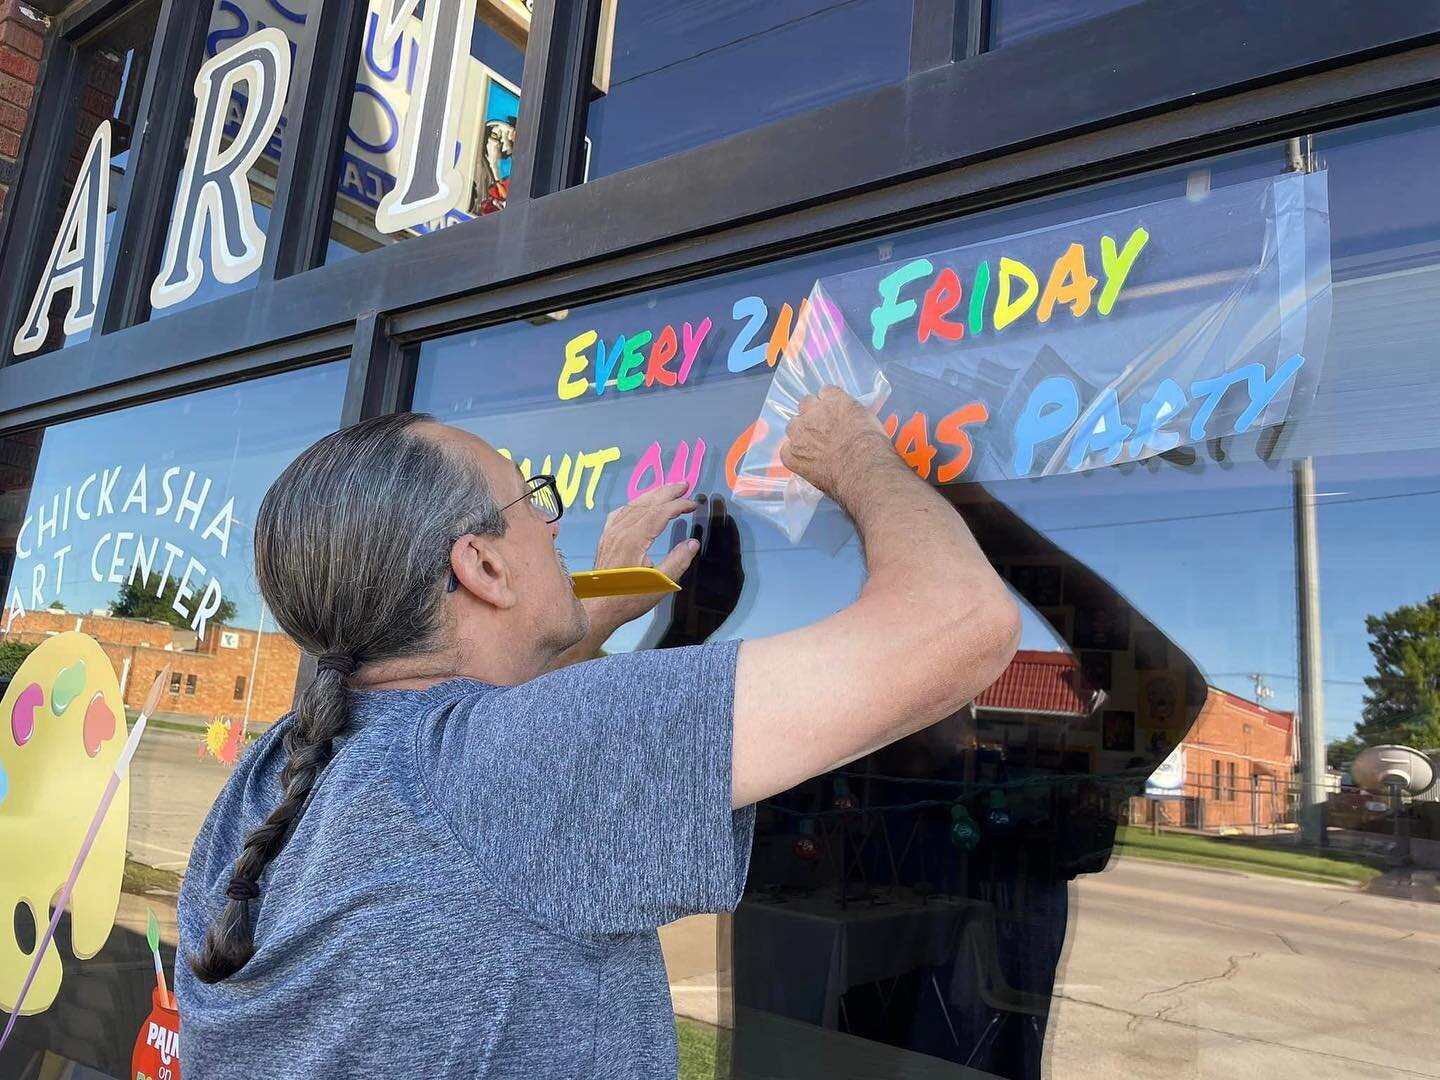 Beautiful morning to put new vinyls on the windows at The Chickasha Art Center! Thanks to my hubby Randy Chavers! And a shout out to Karol Vananda at Dragoon Graphics in Chickasha! (Small business owners can relate, we work 7 days a week sometimes &h